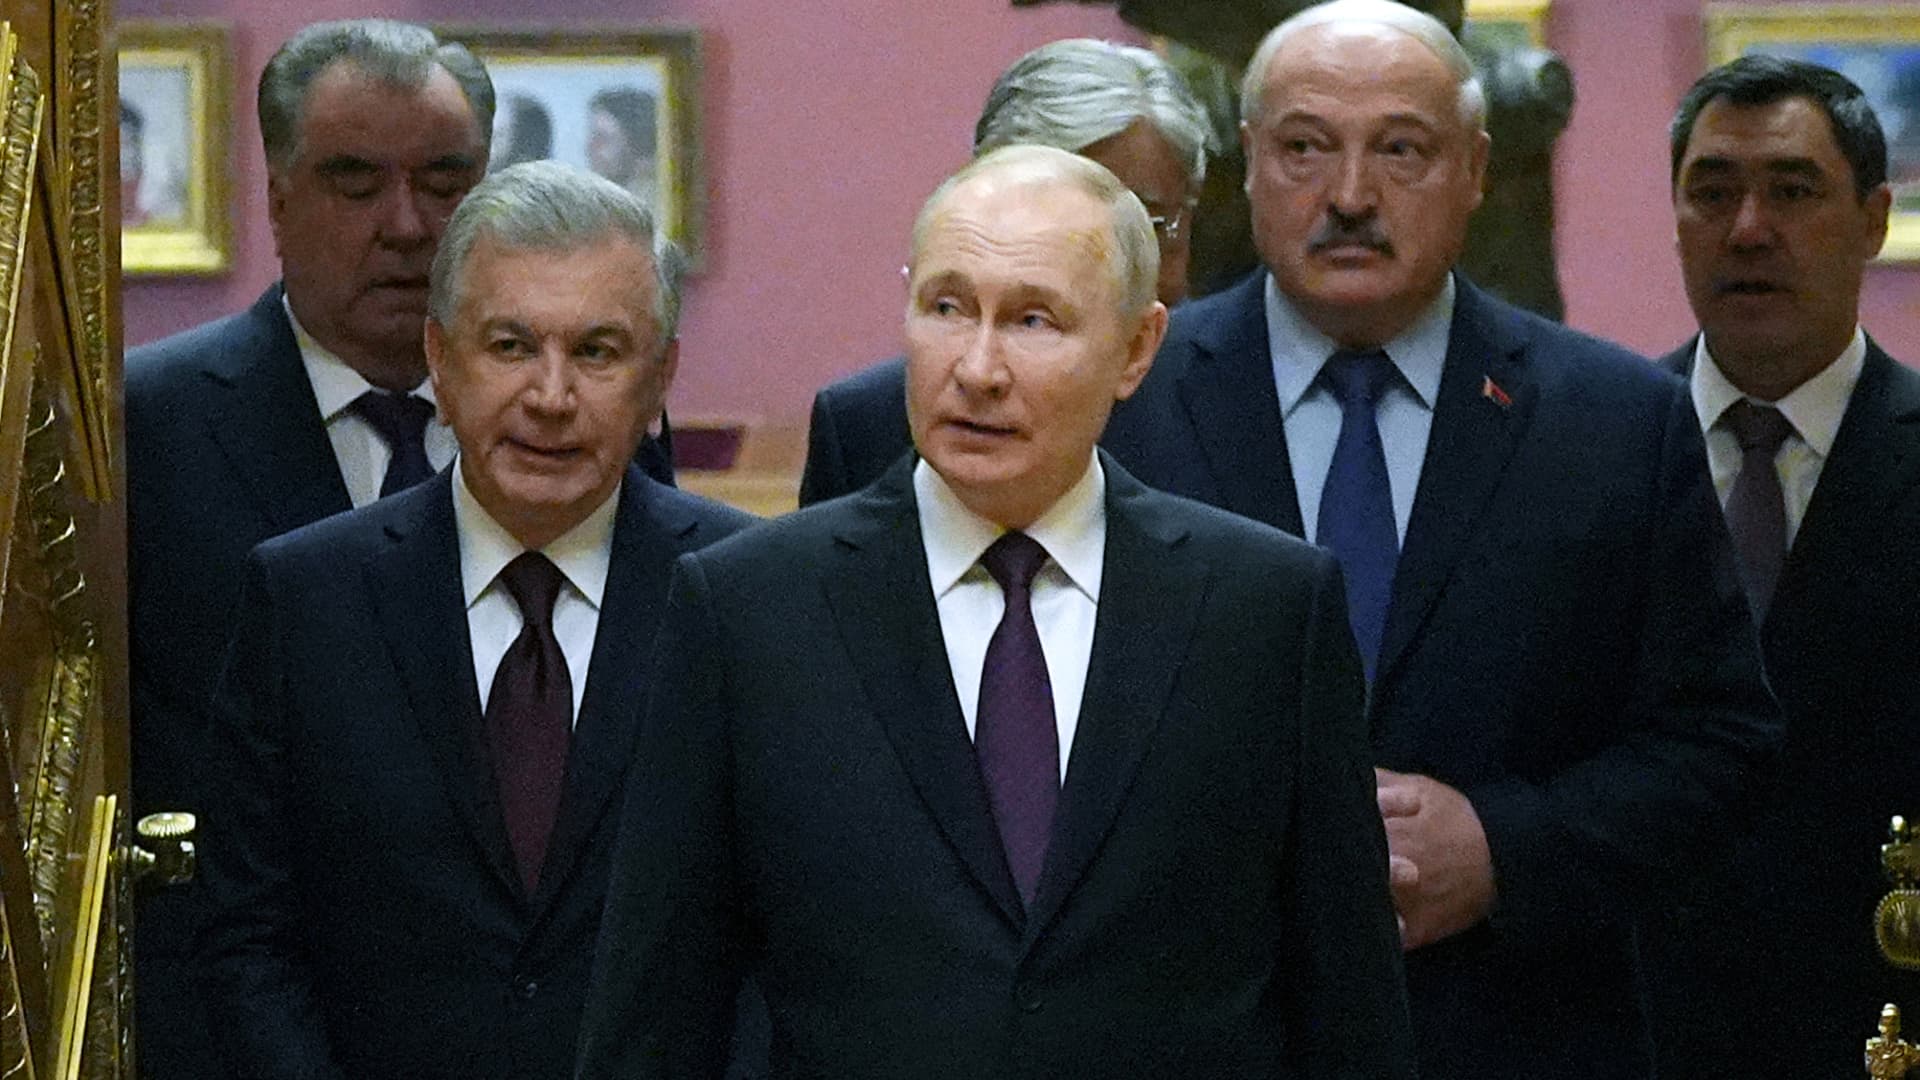 Russia's President Vladimir Putin (C), Tajikistan's President Emomali Rahmon (L), Uzbekistan's President Shavkat Mirziyoyev (2nd L), Kyrgyzstan's President Sadyr Japarov (R) and Belarus' President Alexander Lukashenko (2nd R) enter a hall of the State Russian Museum during an informal summit of the heads of state of the Commonwealth of Independent States (CIS) in Saint Petersburg on December 27, 2022.